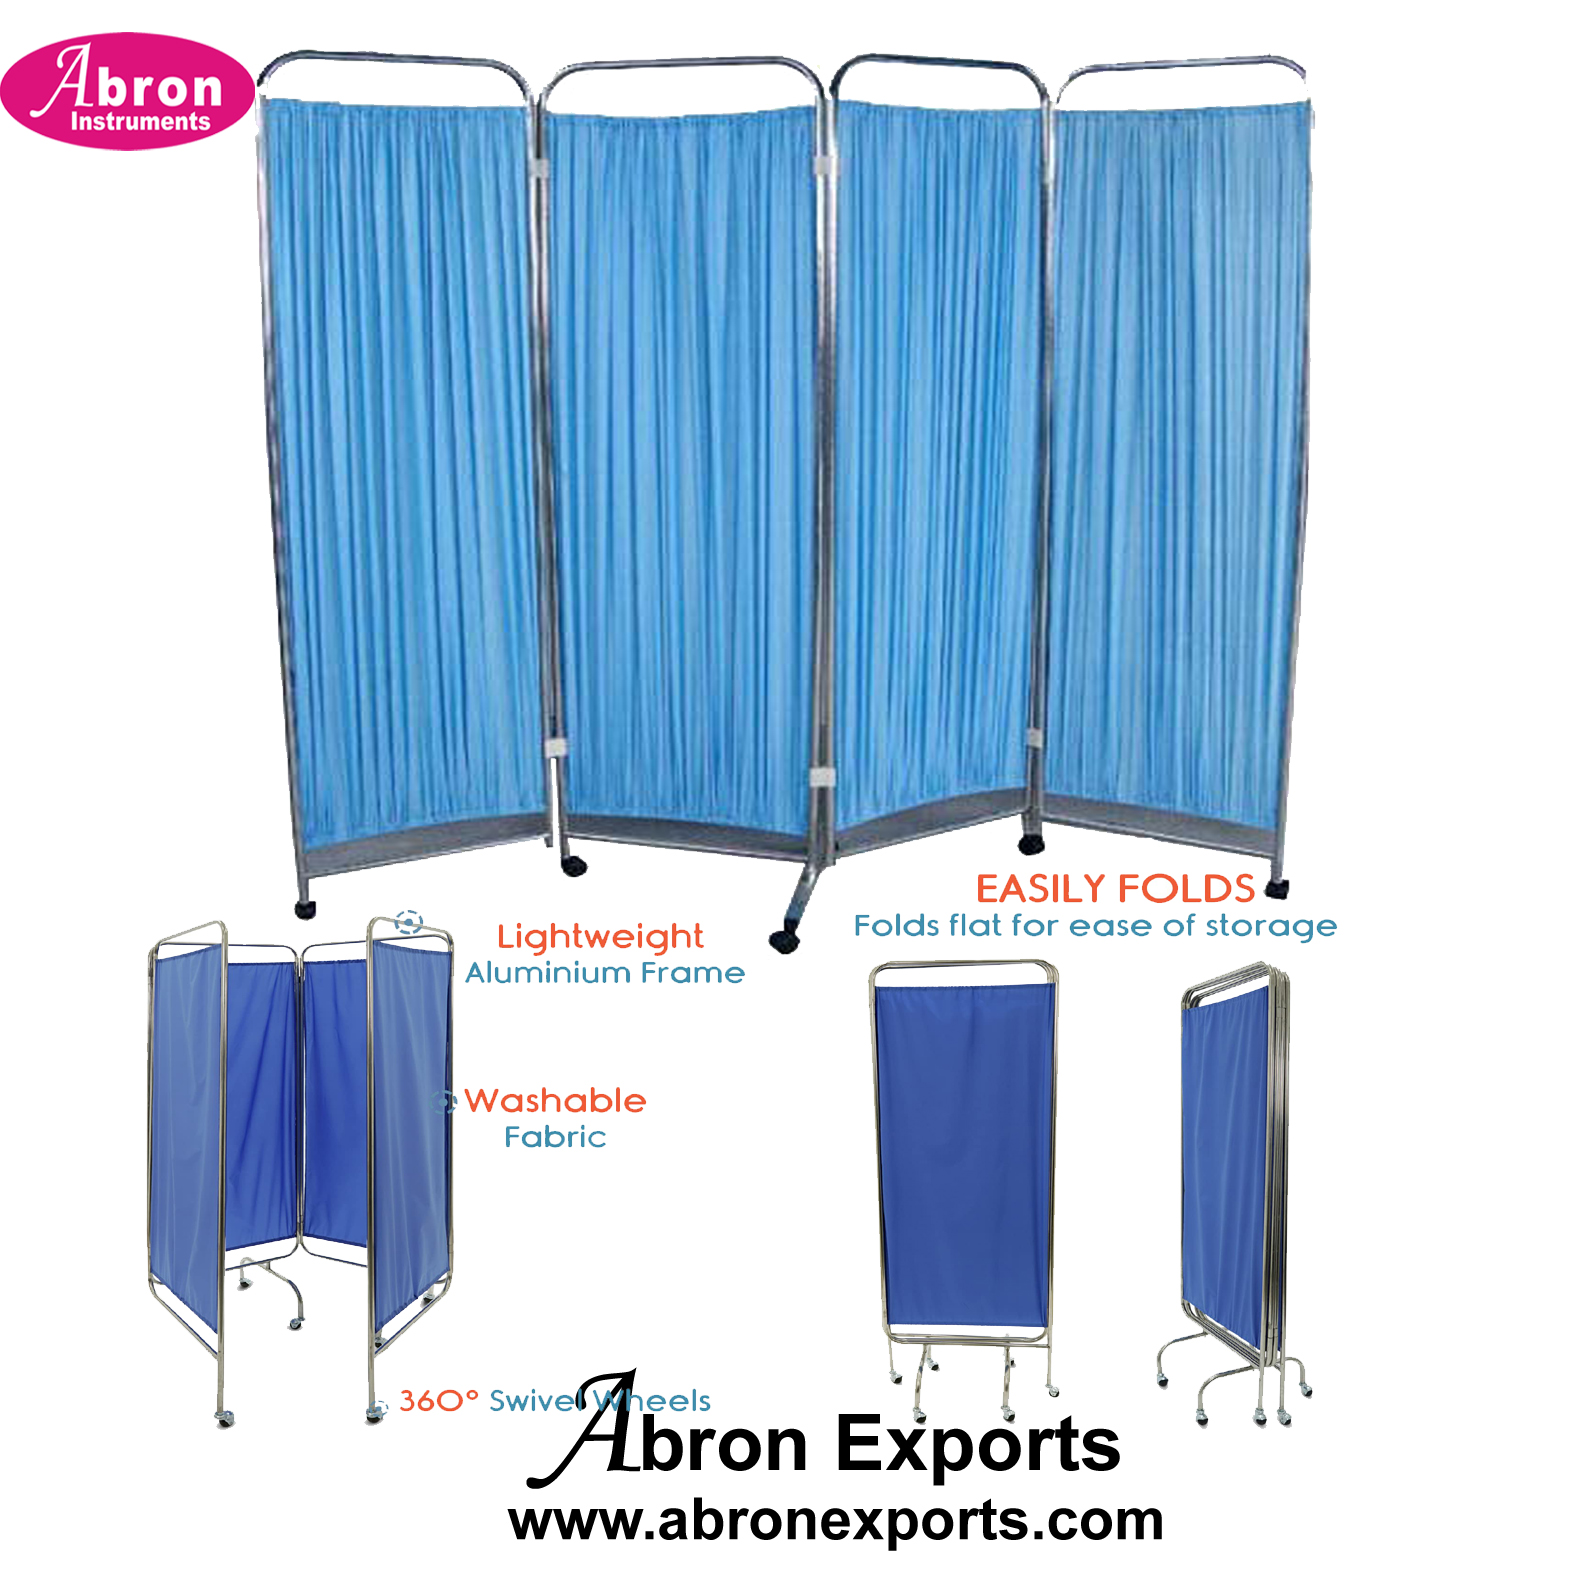 Hospital Medical bedside screens 4 four x2 feet partion with curtons steel frame with wheels Abron ABM-2355-S4P 